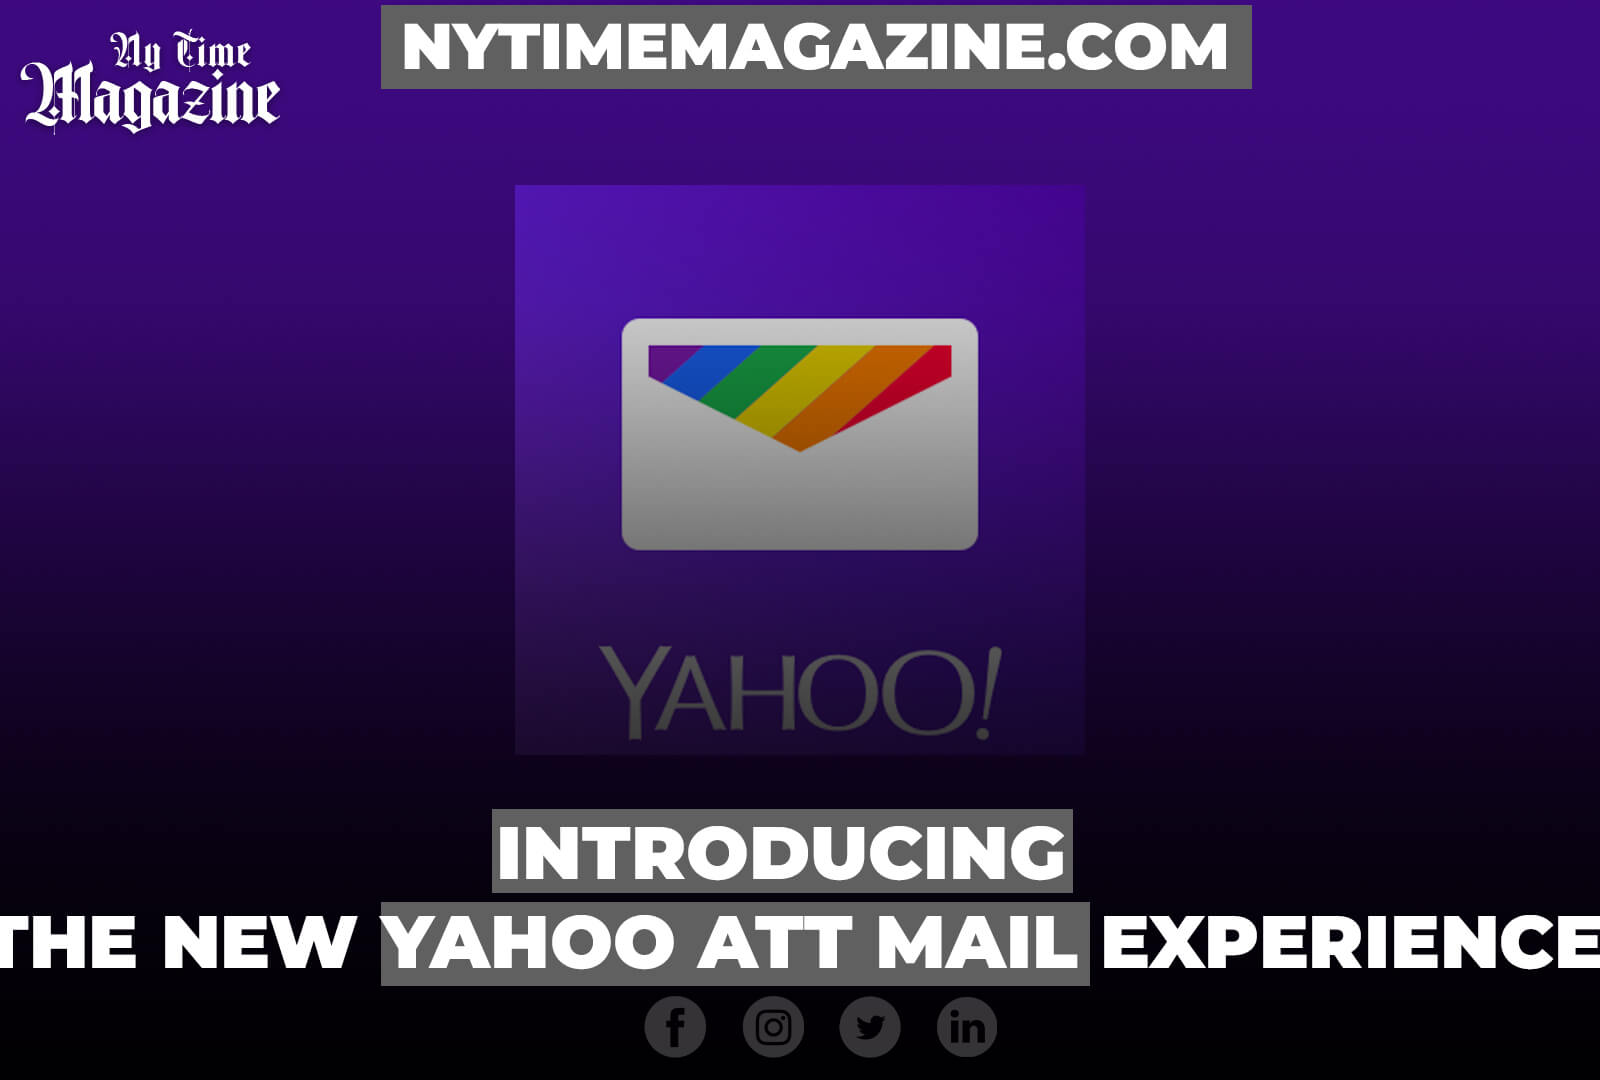 INTRODUCING THE NEW YAHOO ATT MAIL EXPERIENCE